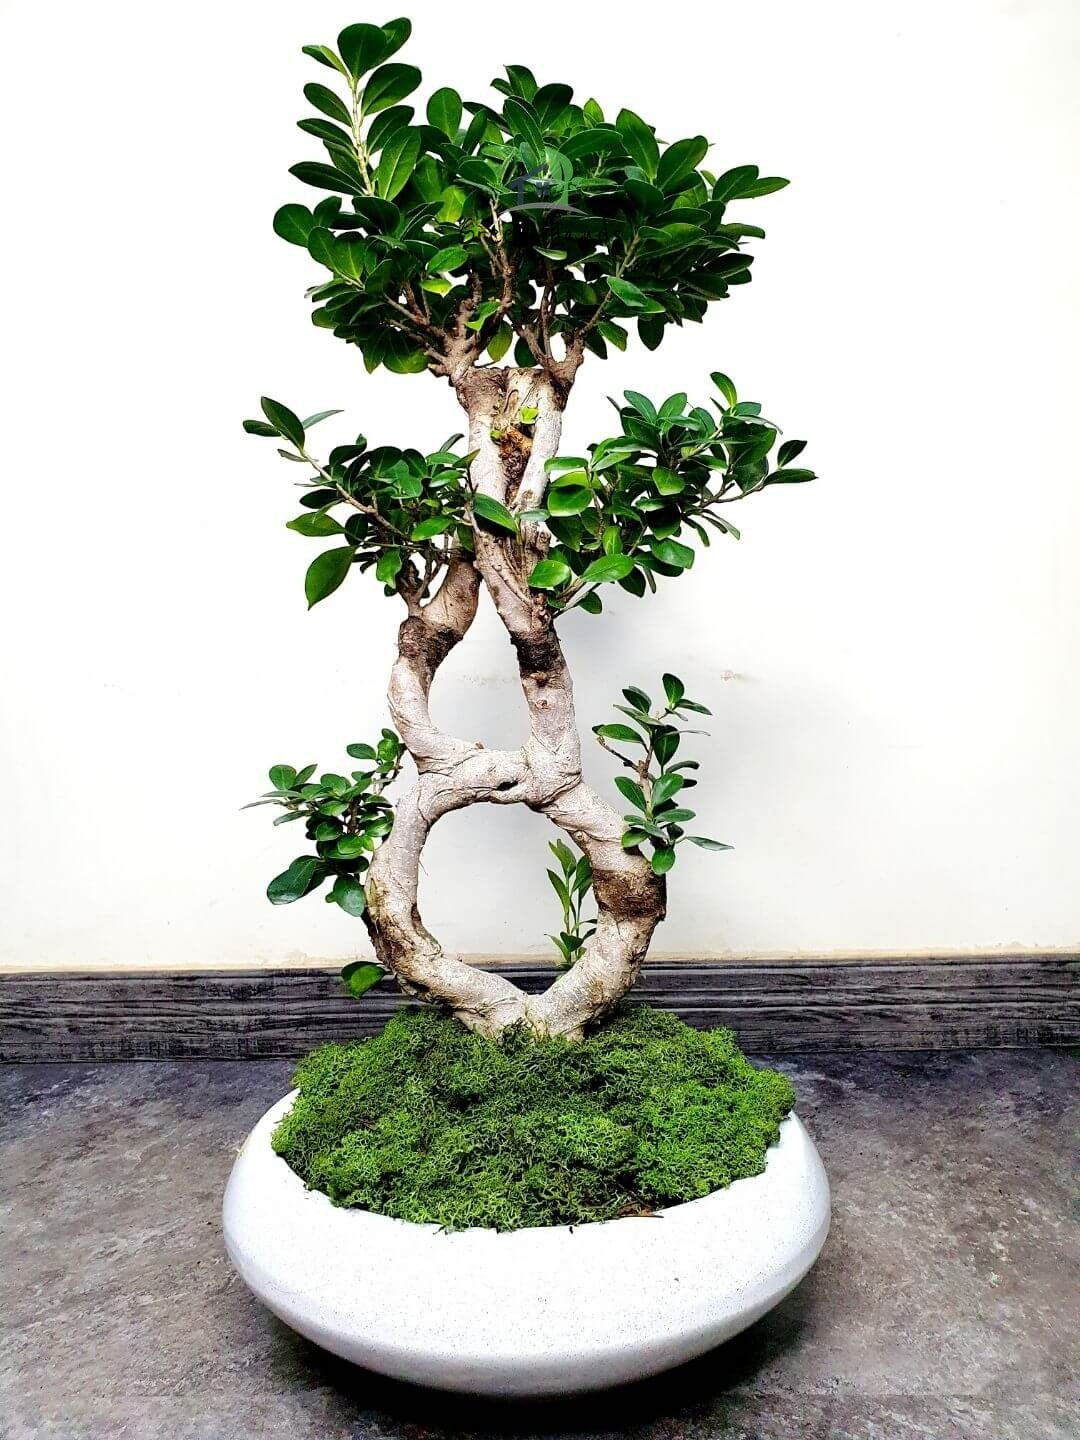 Potted Large 8 shape Bonsai Planted in White Pot with Moss